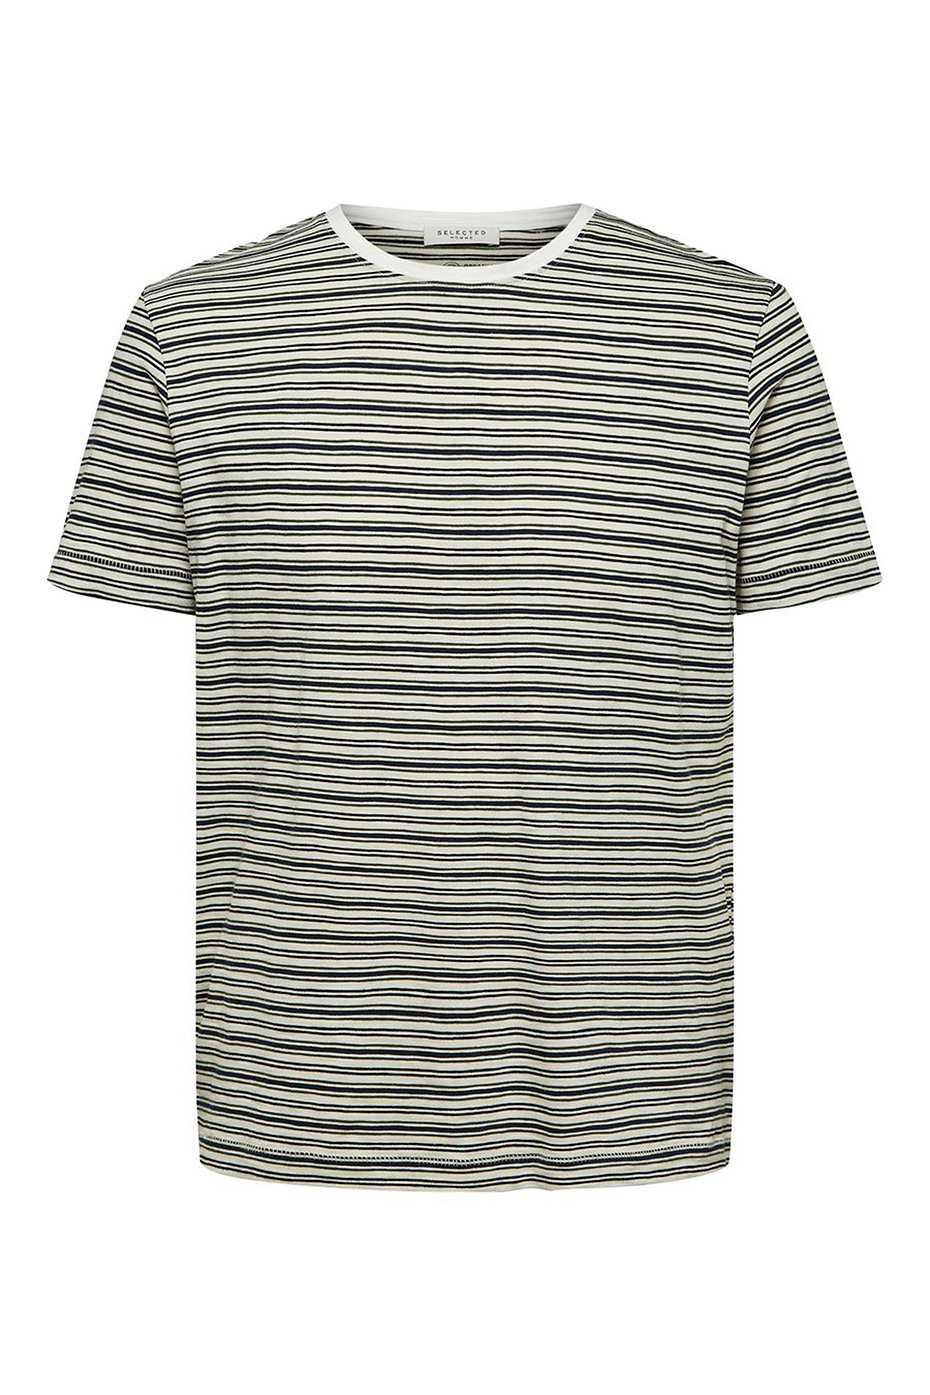 Selected Homme White Grey Stripe Patrick Tee